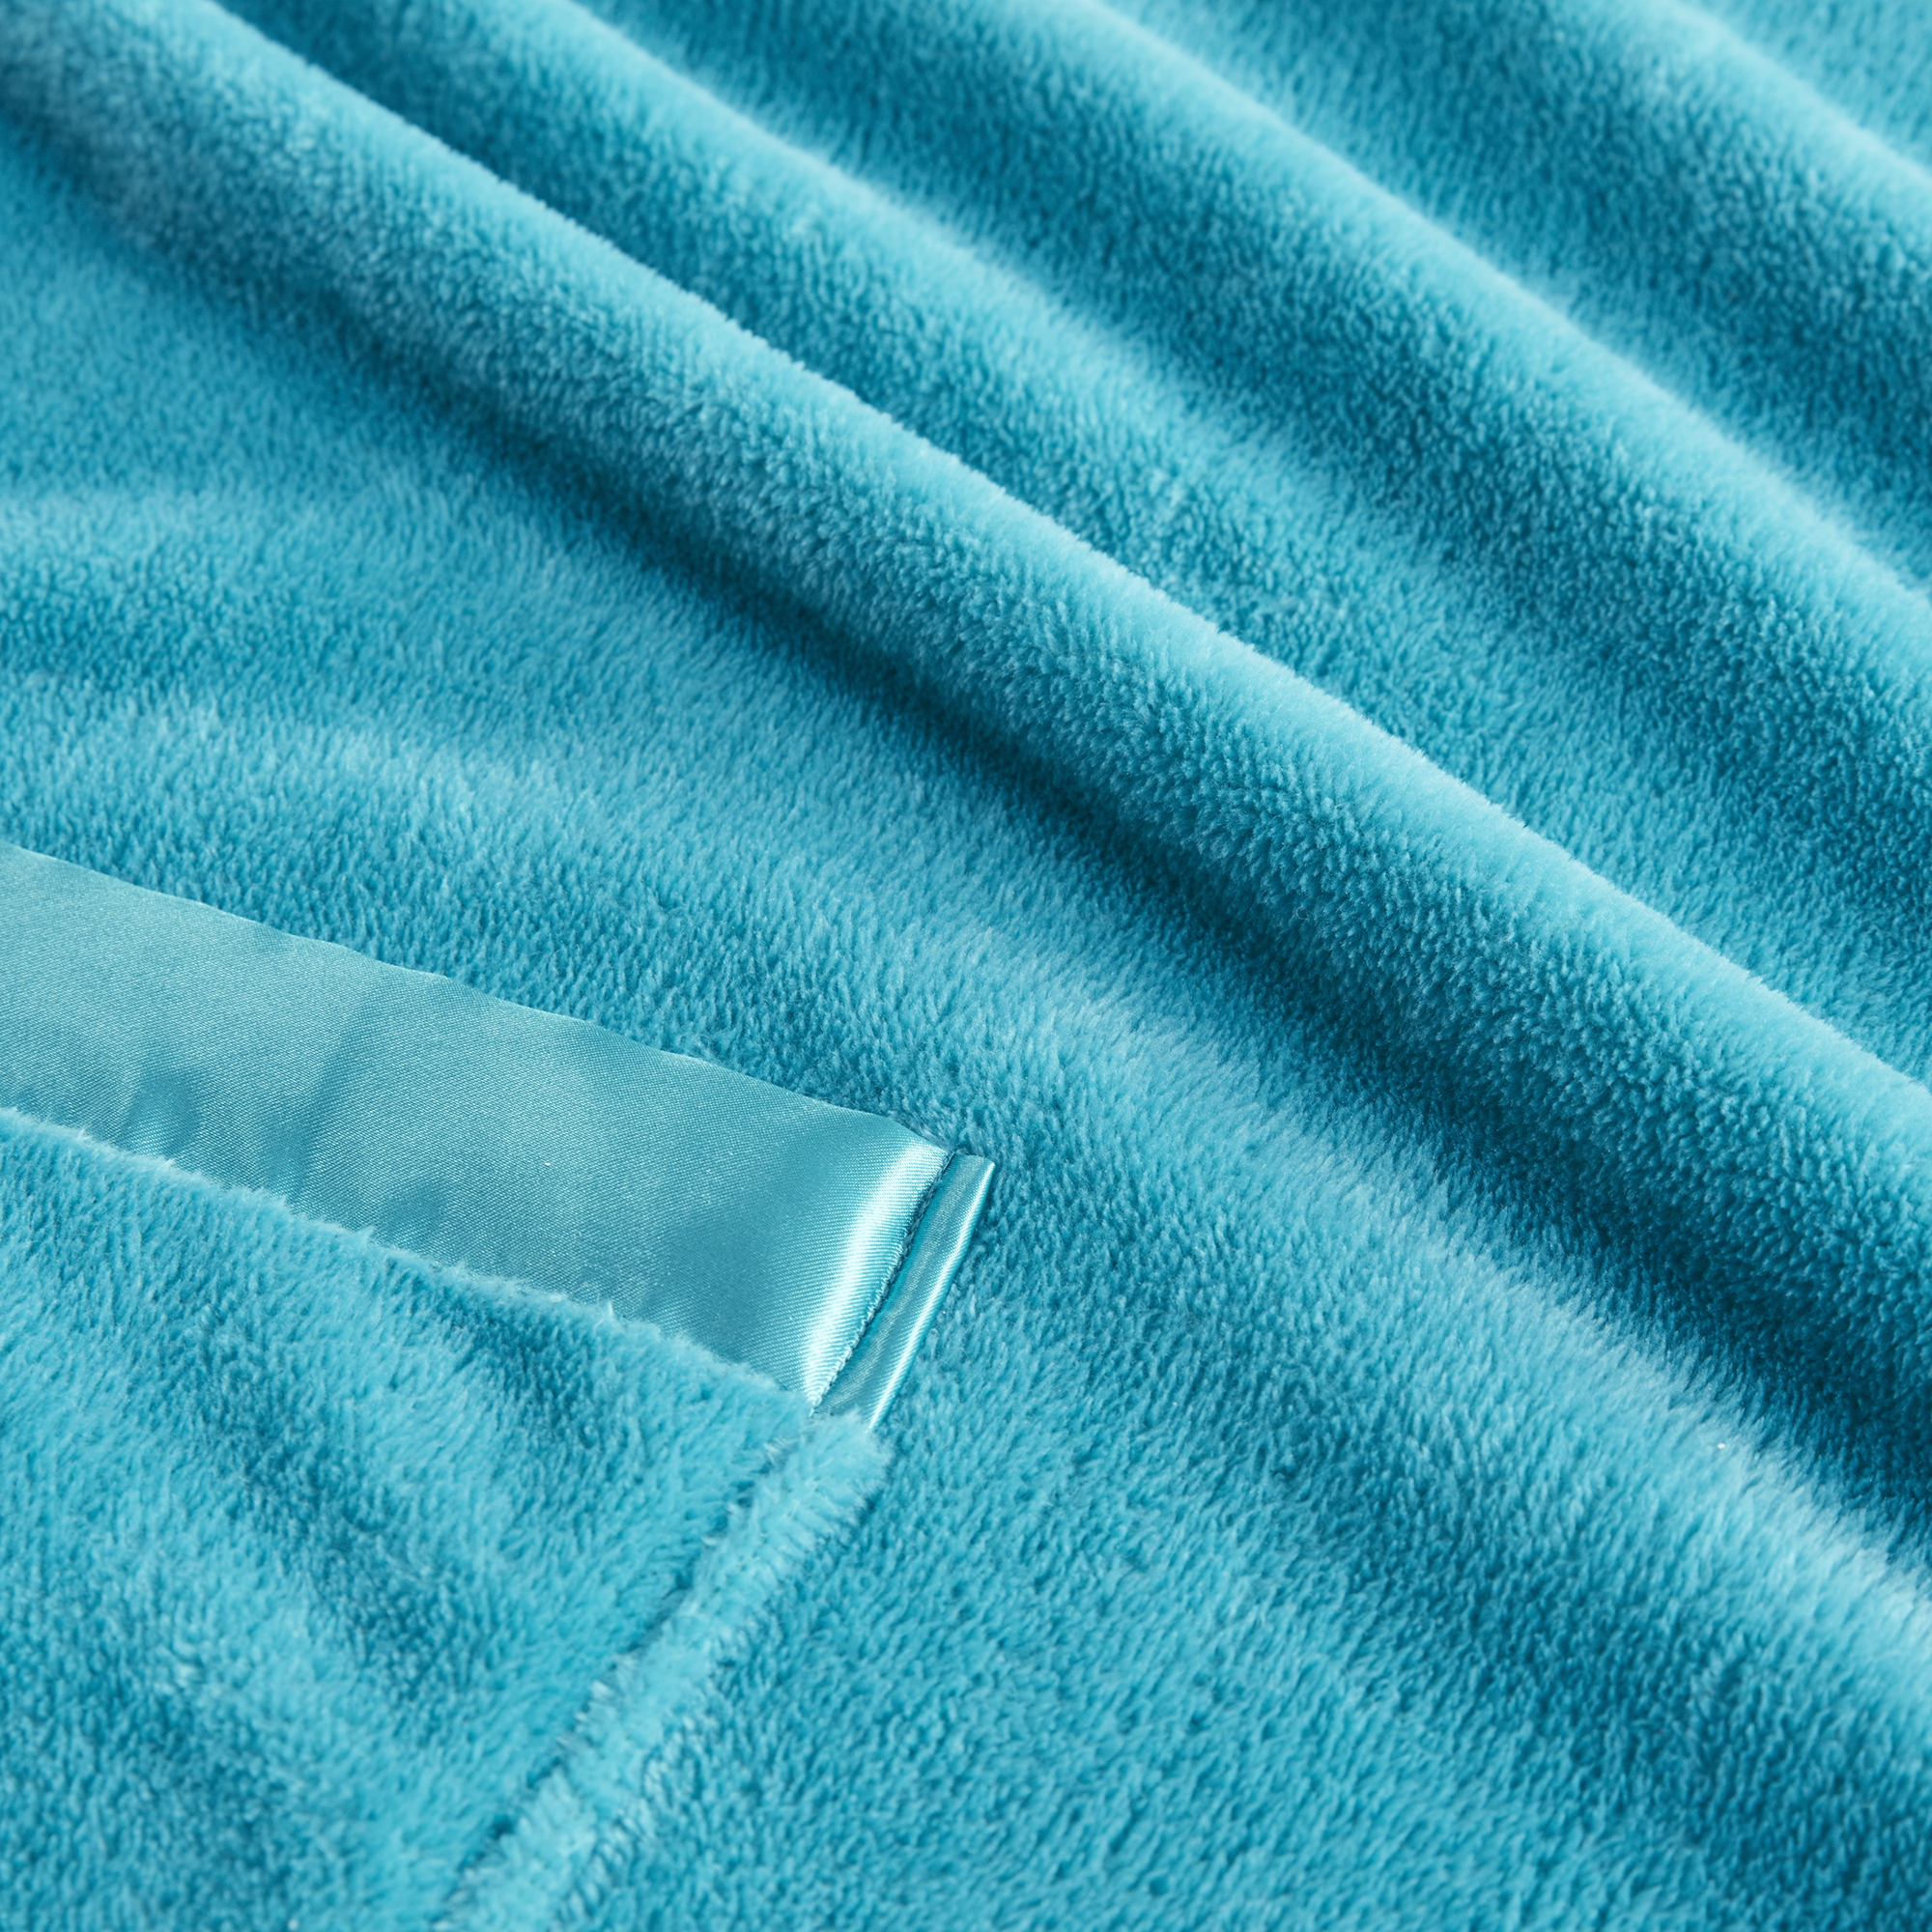 Comfort Spaces Teal Blue Polyester Plush Throw Blanket, Standard Throw - image 6 of 9